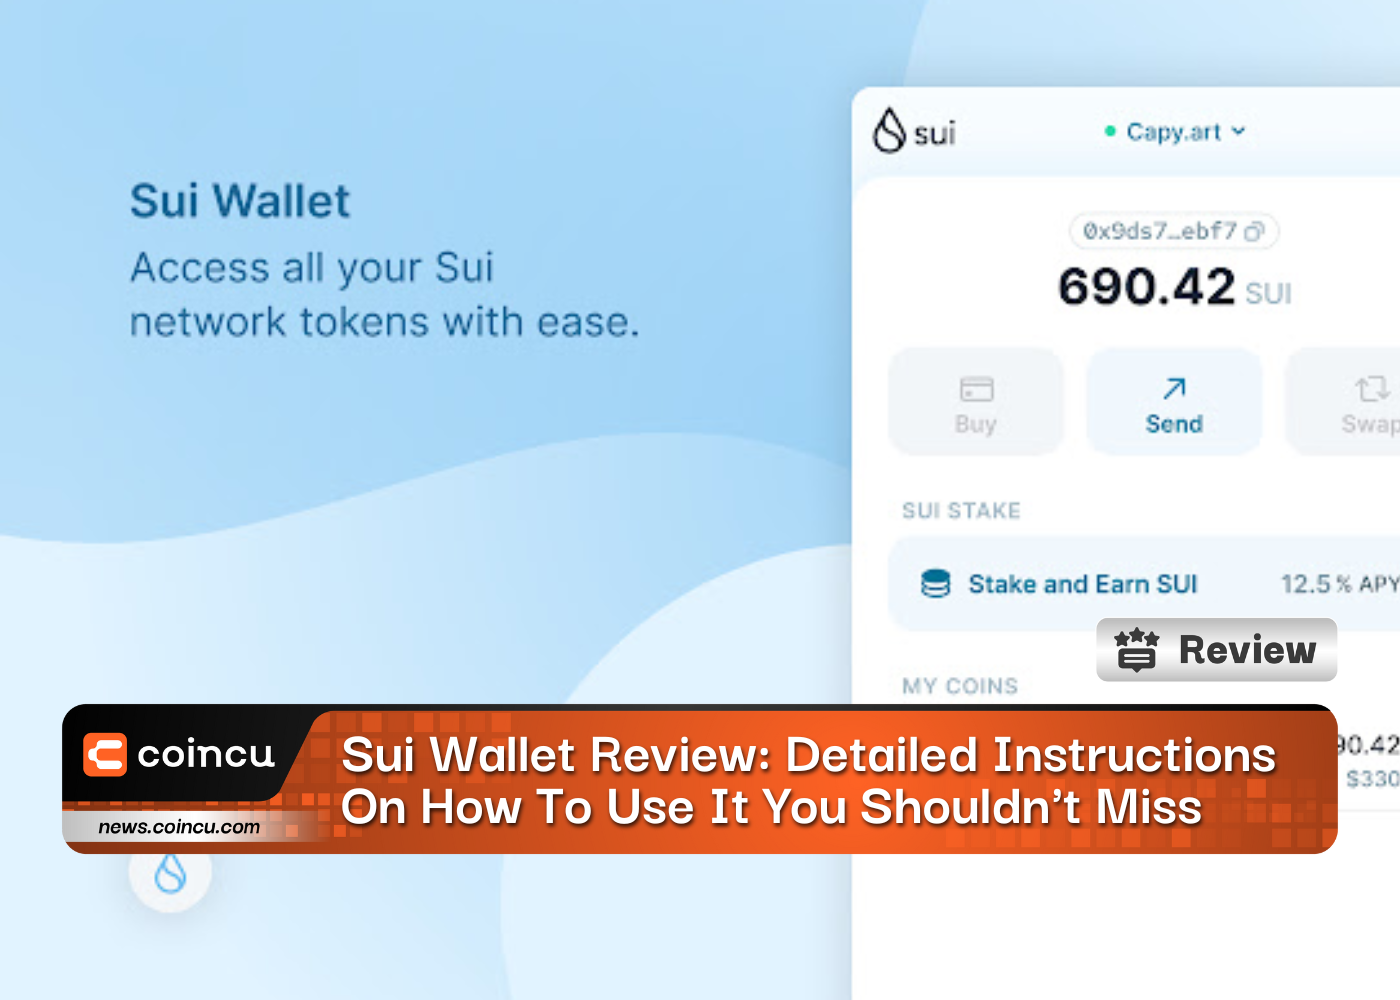 Sui Wallet Review: Detailed Instructions On How To Use It You Shouldn't Miss